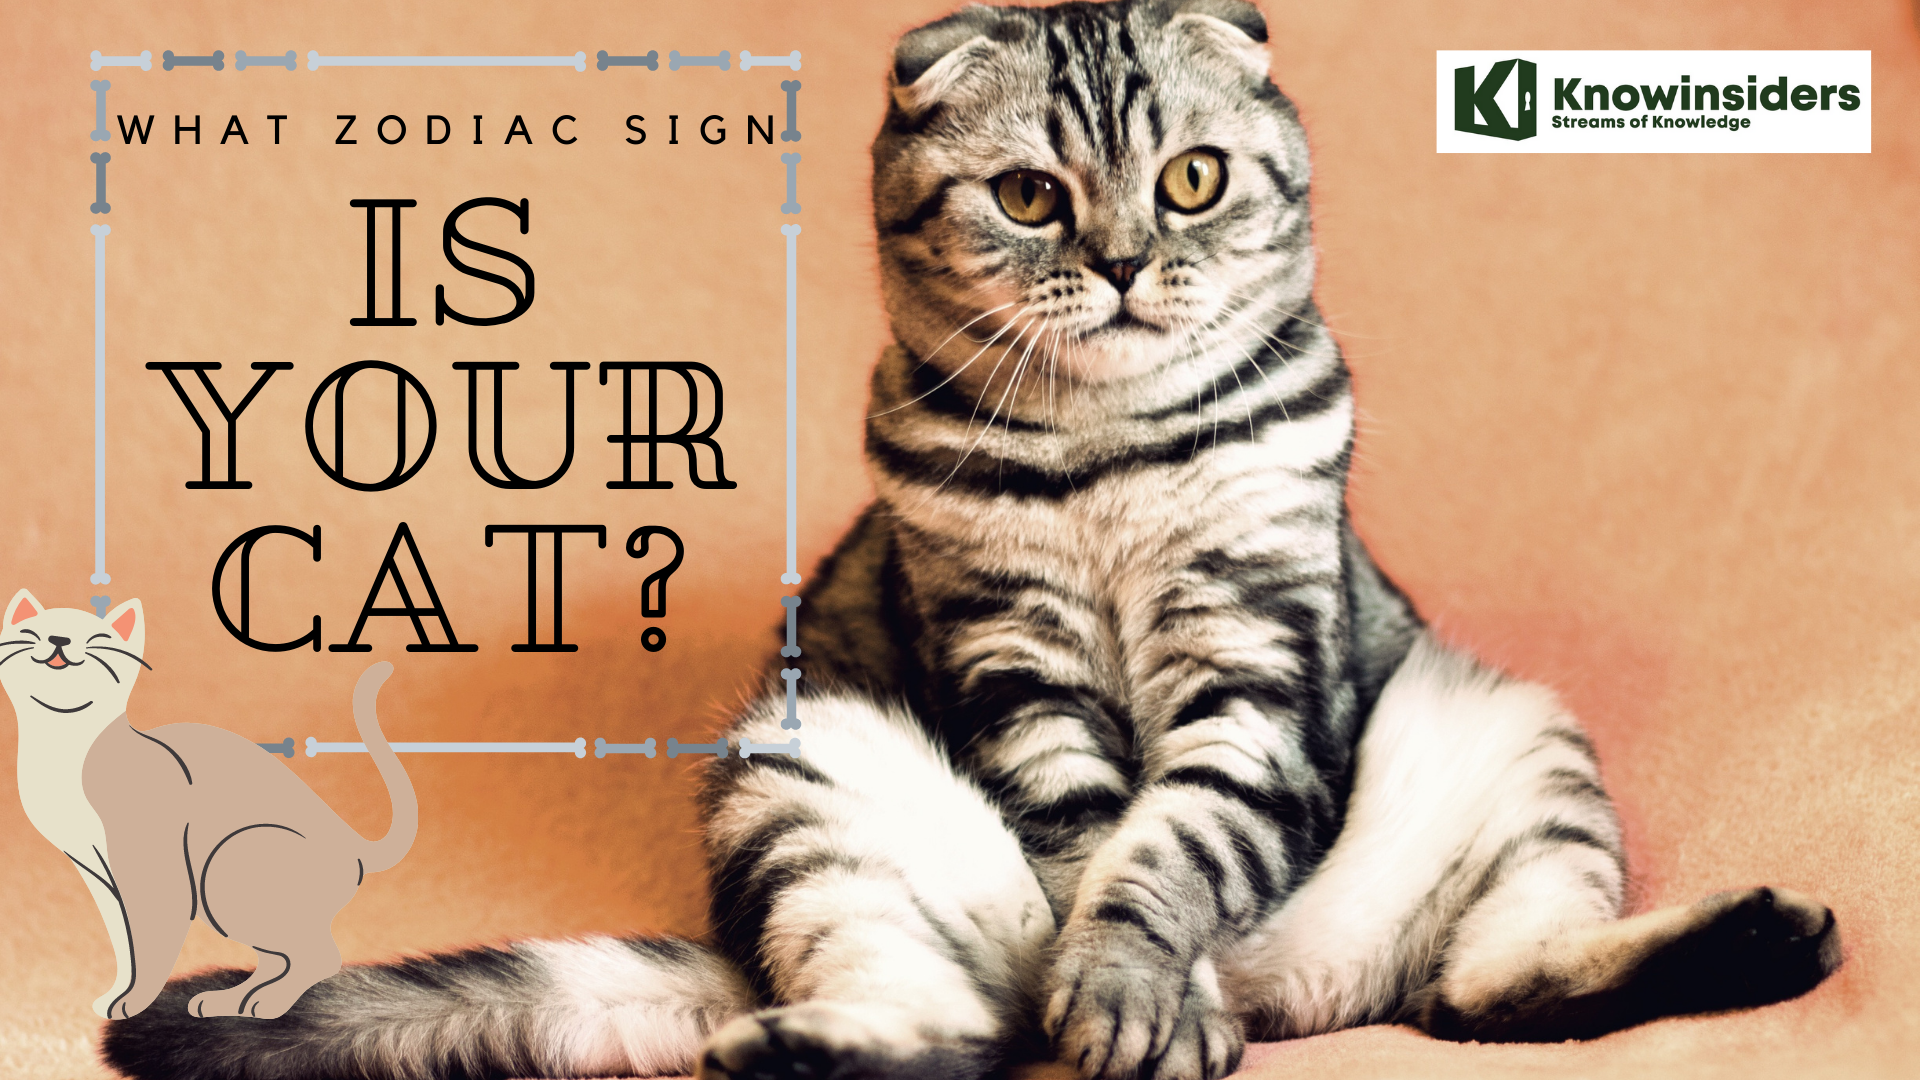 Read 'Cat Zodiac Sign' to Know their Personality and Horoscope